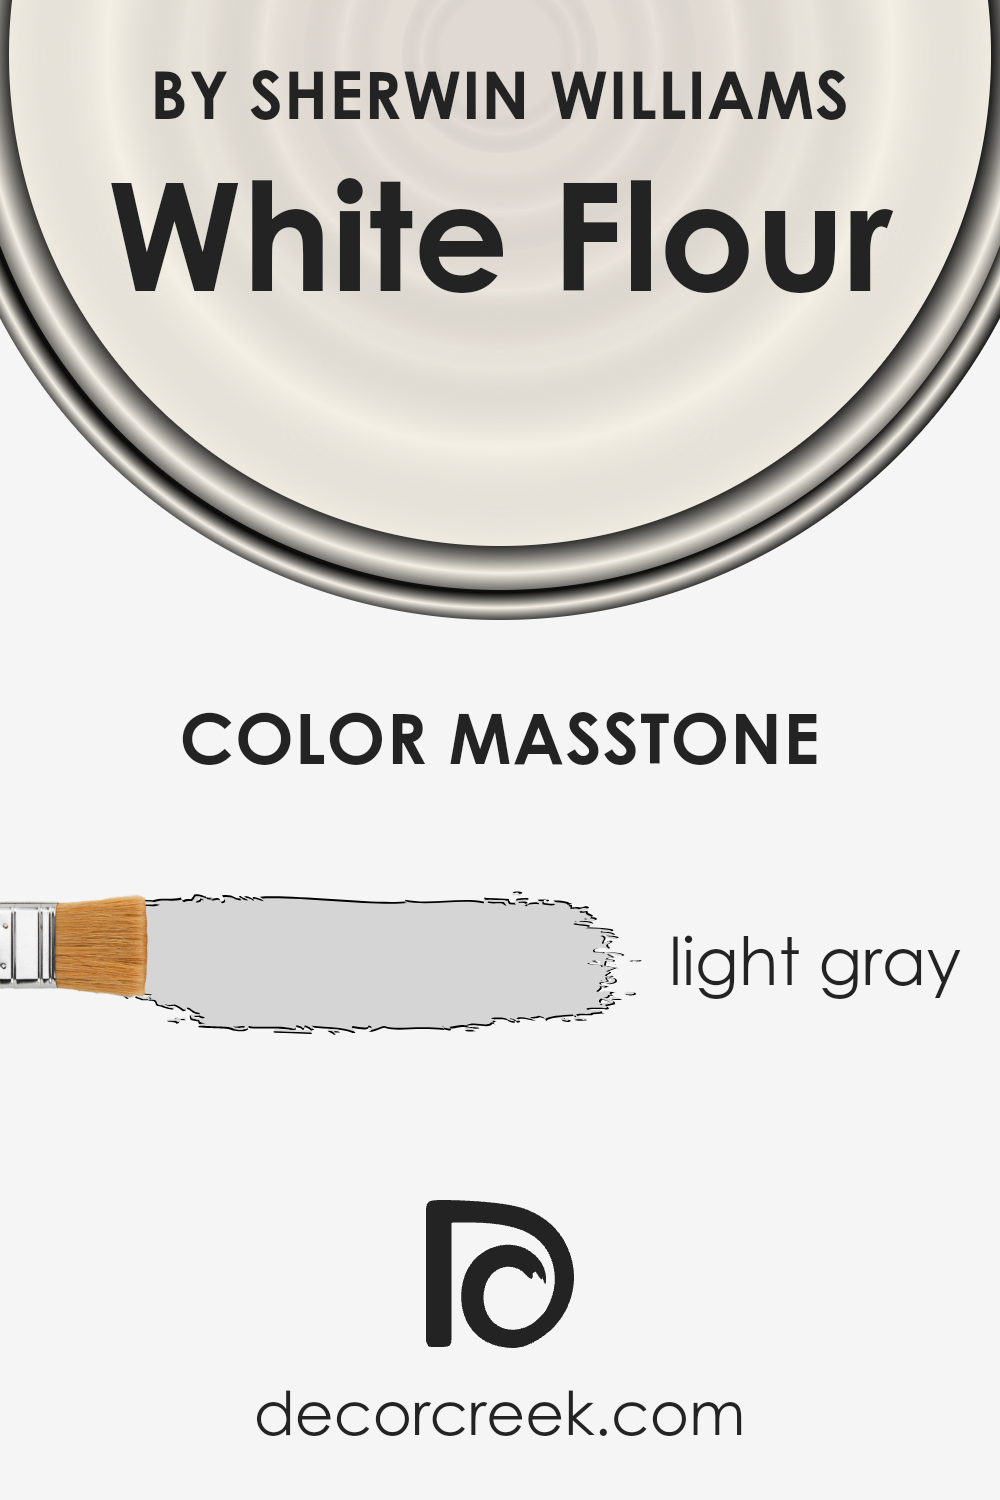 what_is_the_masstone_of_white_flour_sw_7102